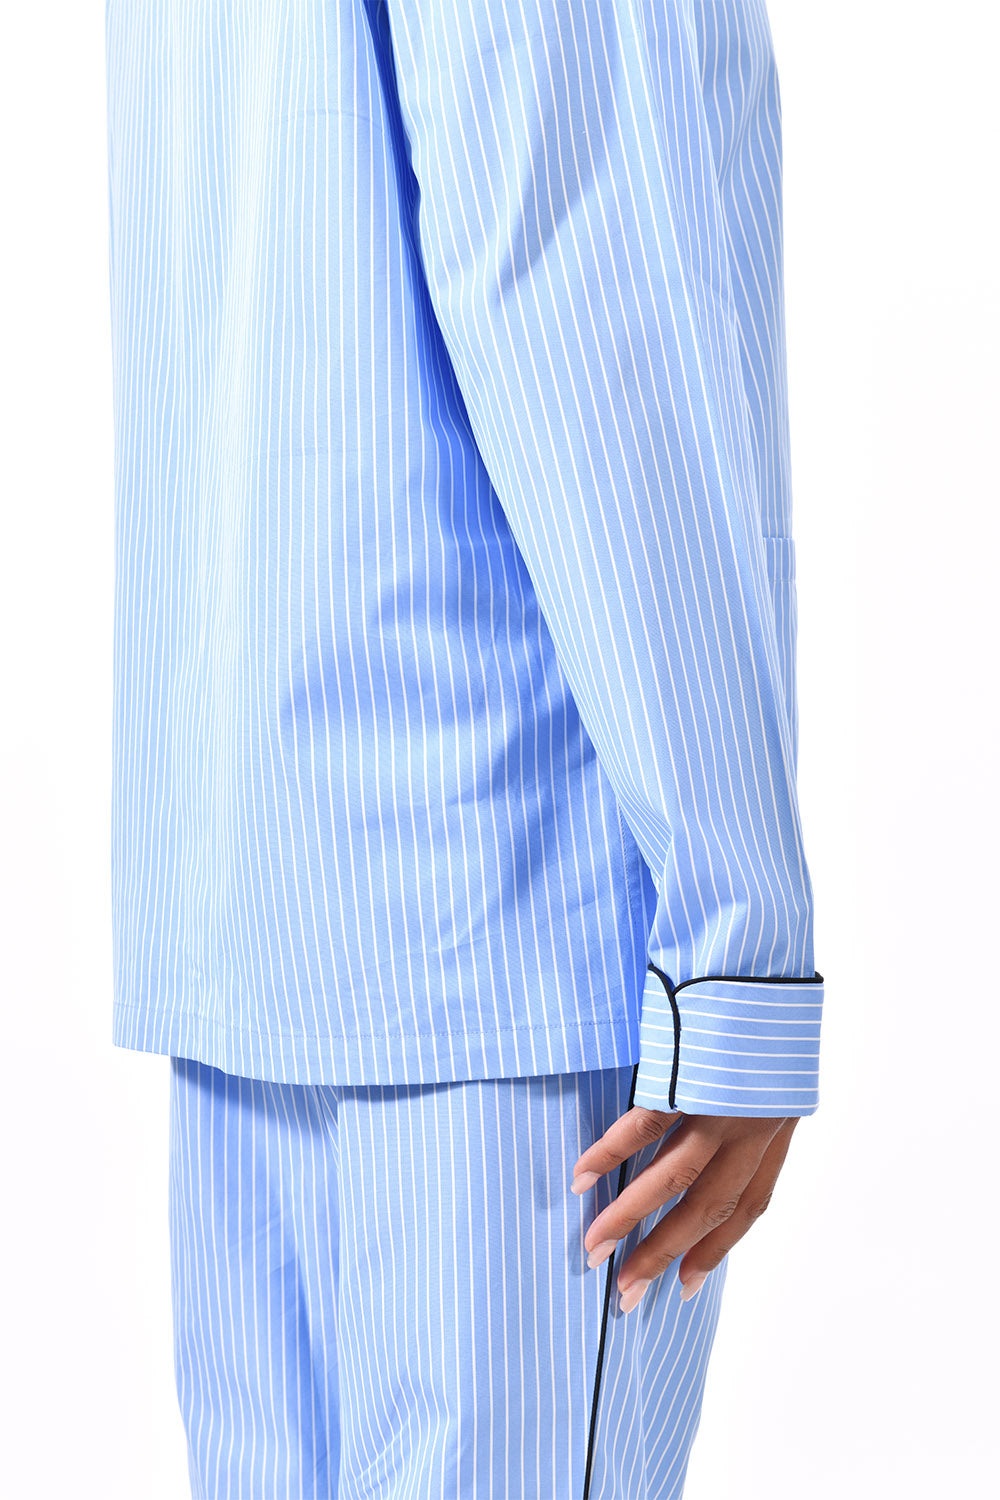 The Waldorf in blue striped cotton broadcloth